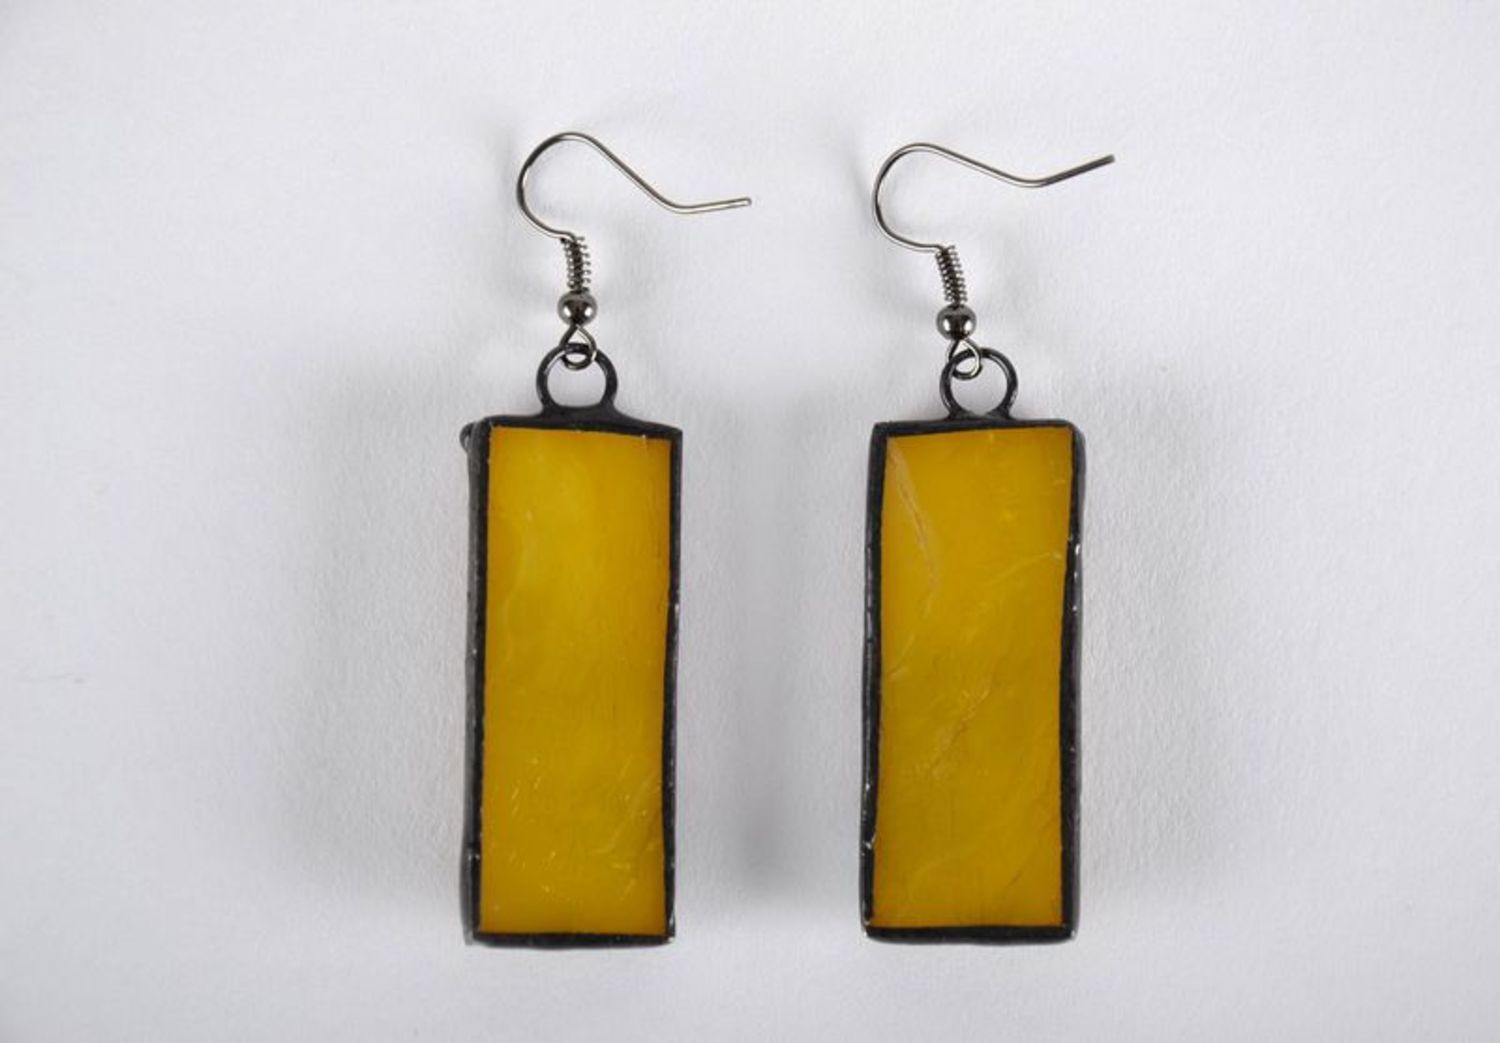 Stained glass earrings made of copper and glass photo 3